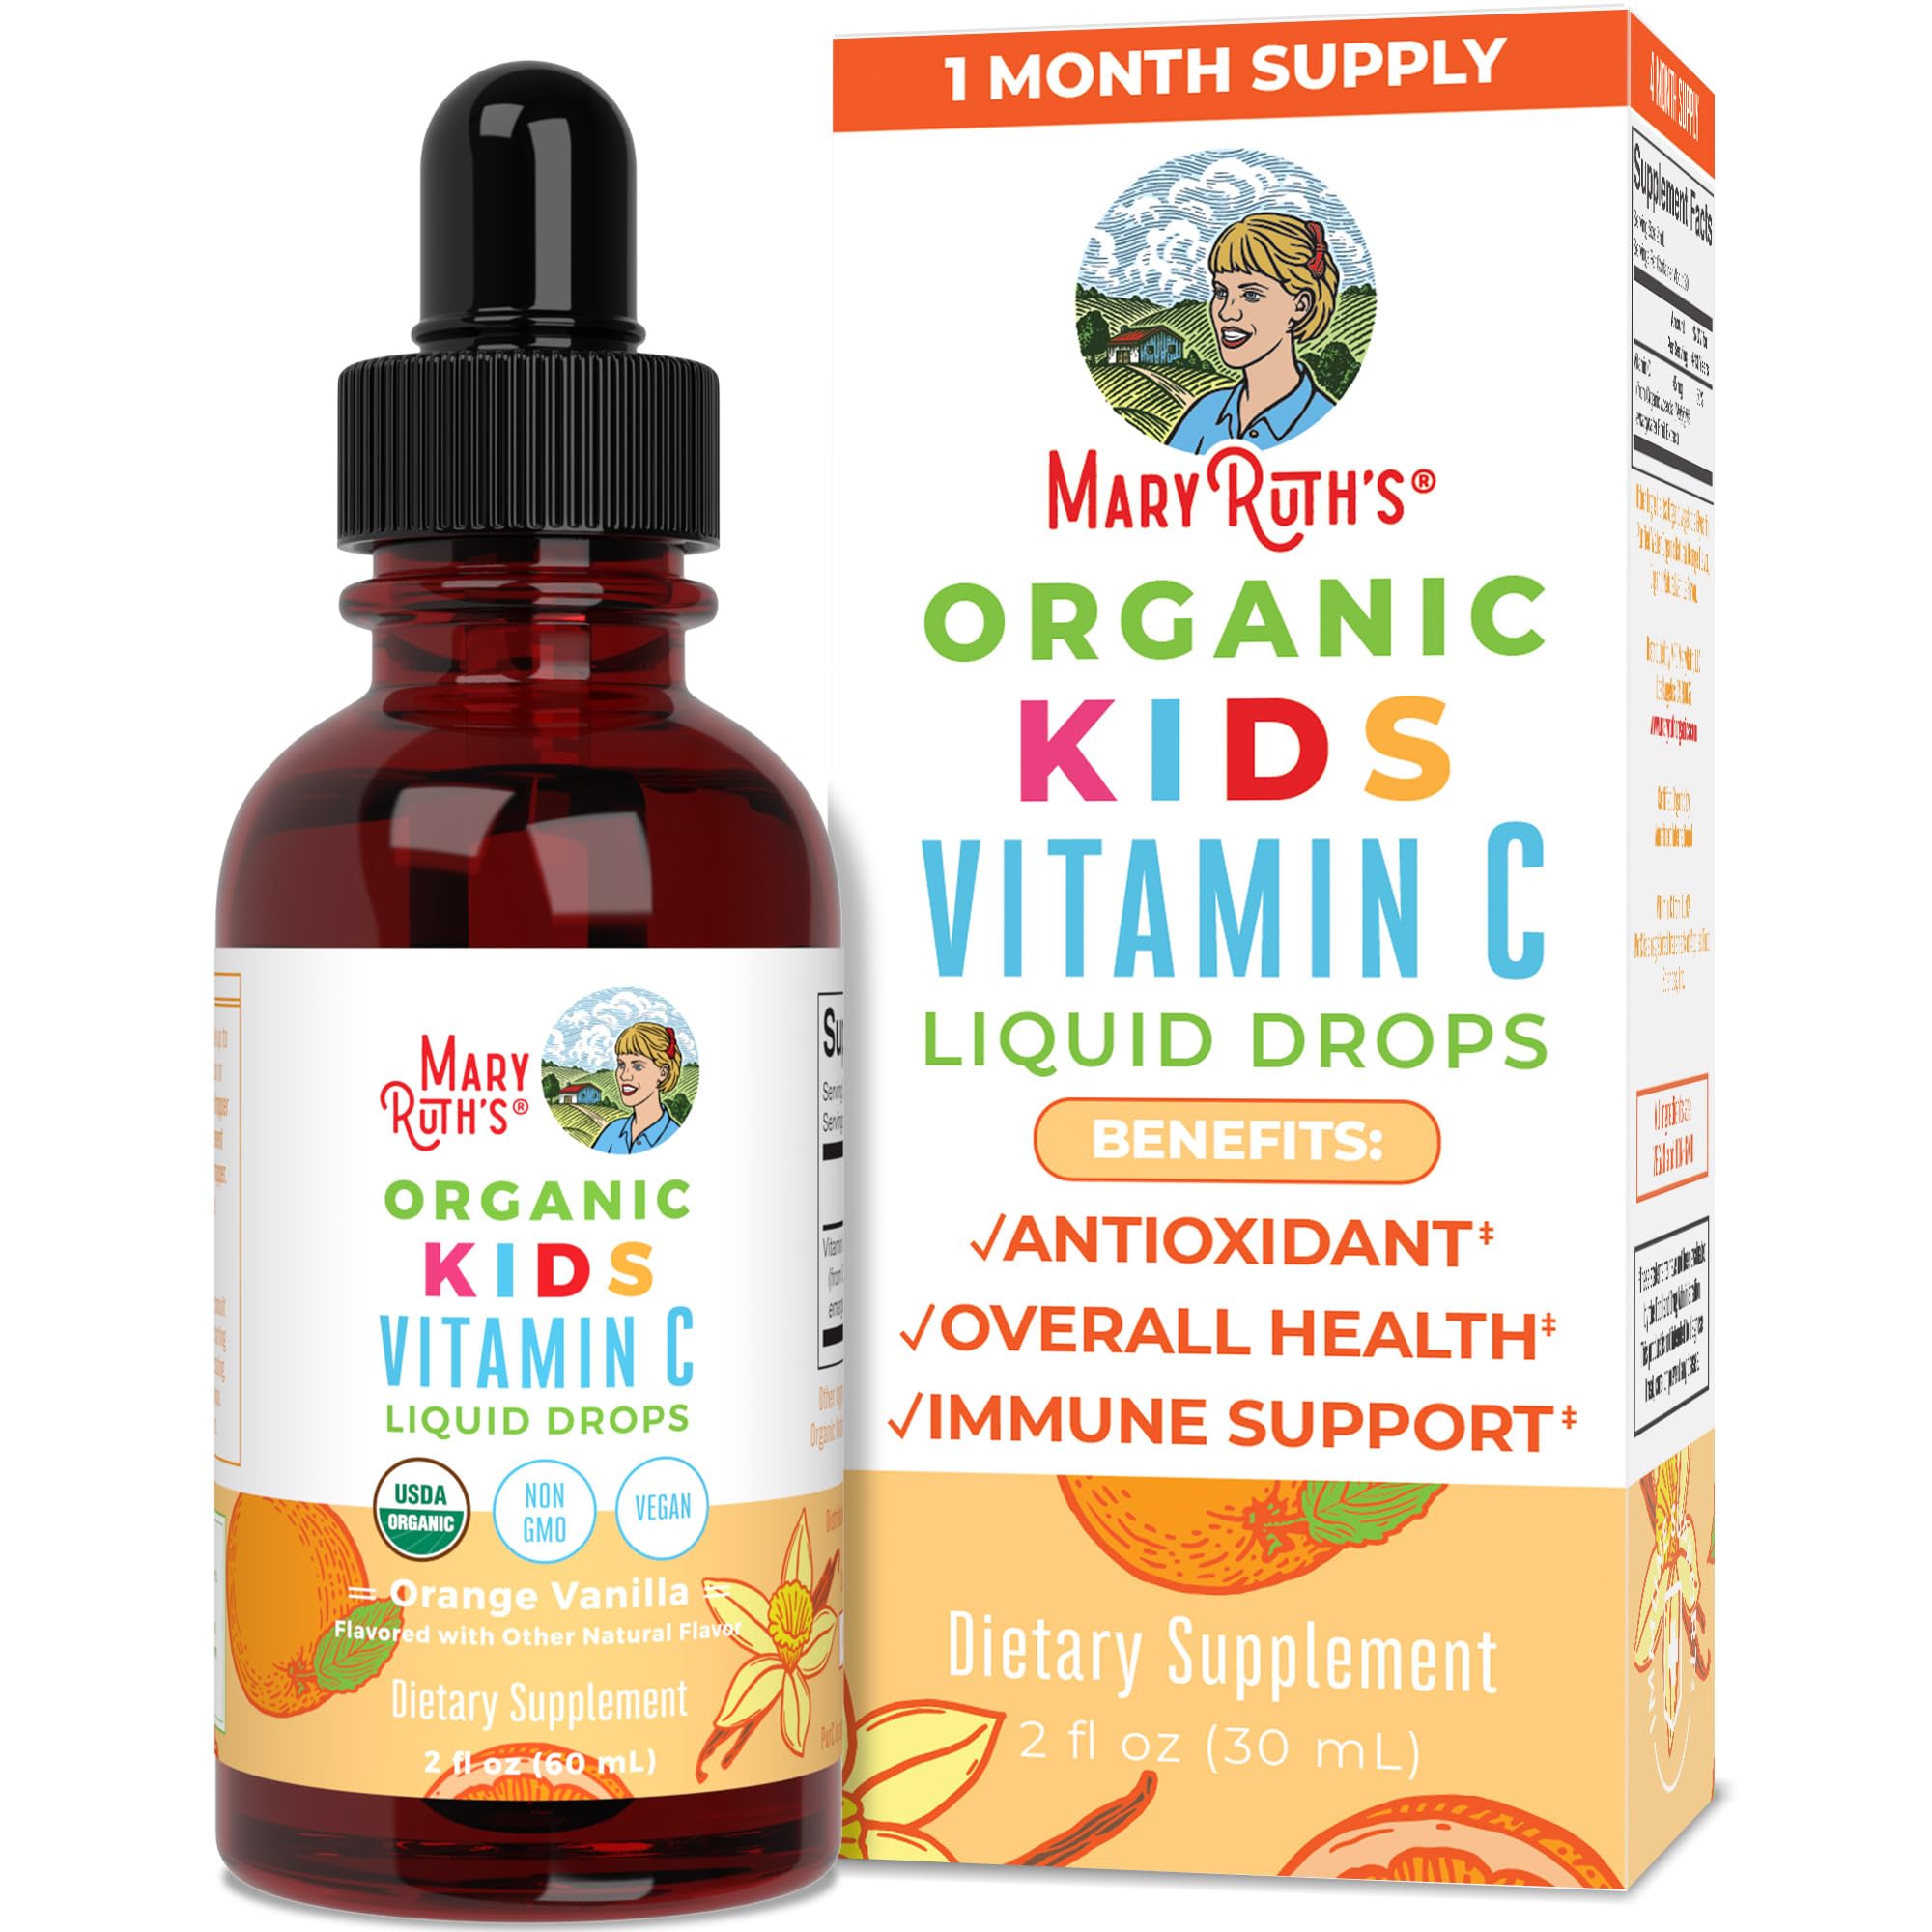 MaryRuth's USDA Organic Kids Vitamin C Liquid Drops and Zinc Liquid Supplement for Adults & Kids in Strawberry Lemon, 2-Pack Bundle for Immune Support, Skin Health, and Overall Health, Vegan & Non-GMO